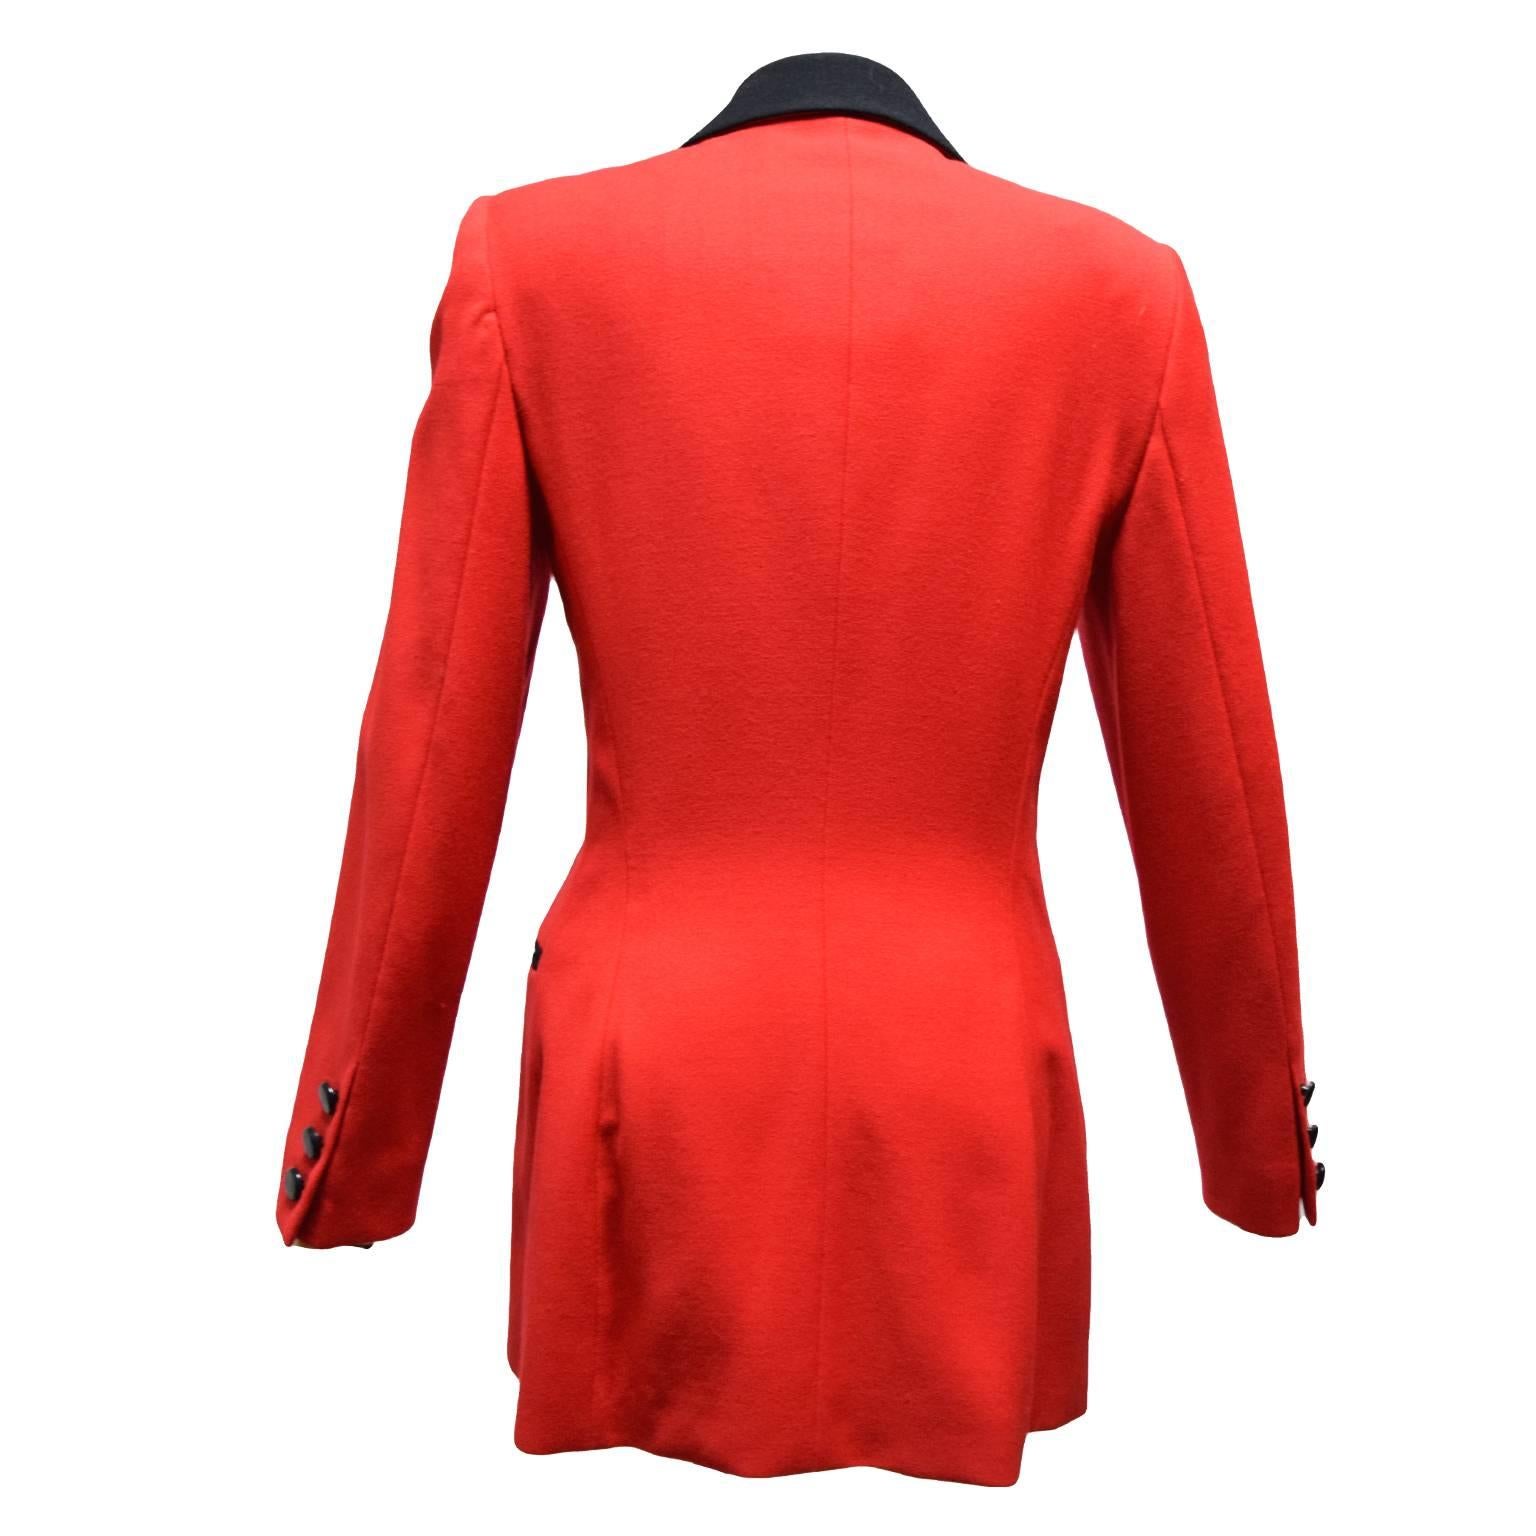 This Escada jacket is made of 100% wool and is red with black wool trimming. The jacket is fully lined in red silk and has two side knife pleated pockets and round button closures. 